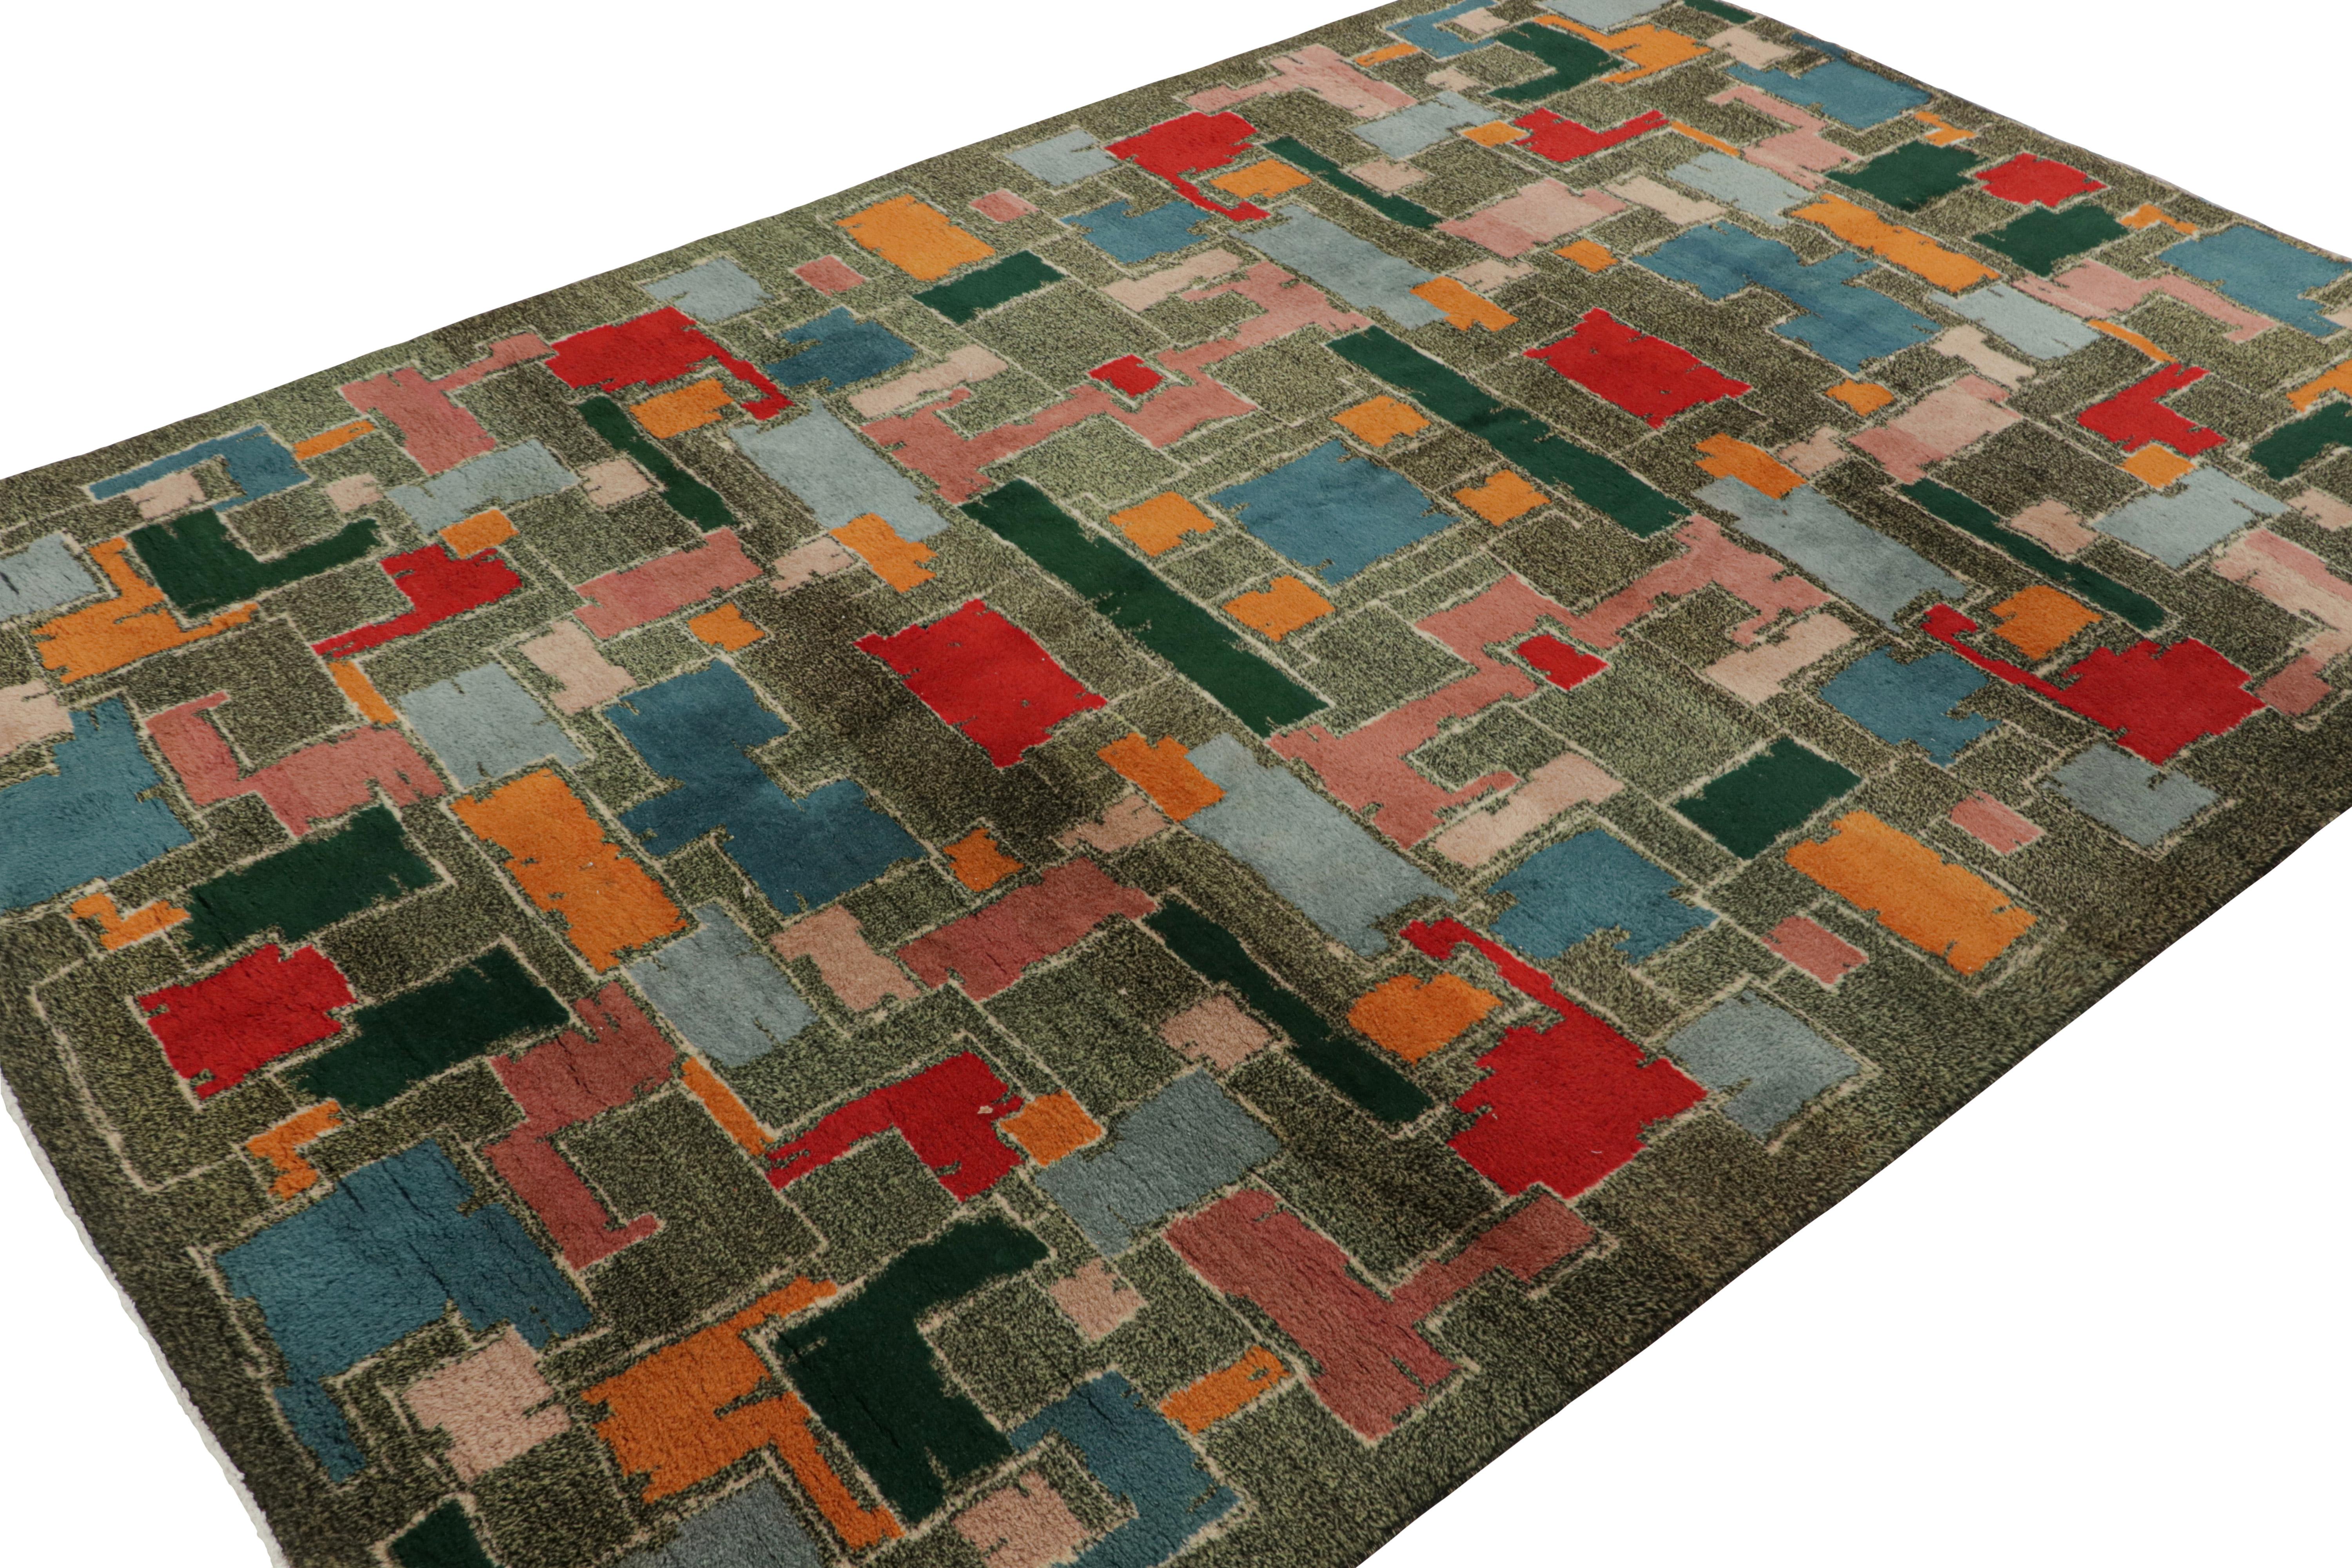 Hand-knotted in wool, circa 1960-1970, originating from Turkey, this 7x10 vintage rug is a classic Zeki Müren masterpiece. Its design with Art Deco-inspired geometric patterns, makes it an exciting addition to the Mid-Century Pasha Collection. 

On